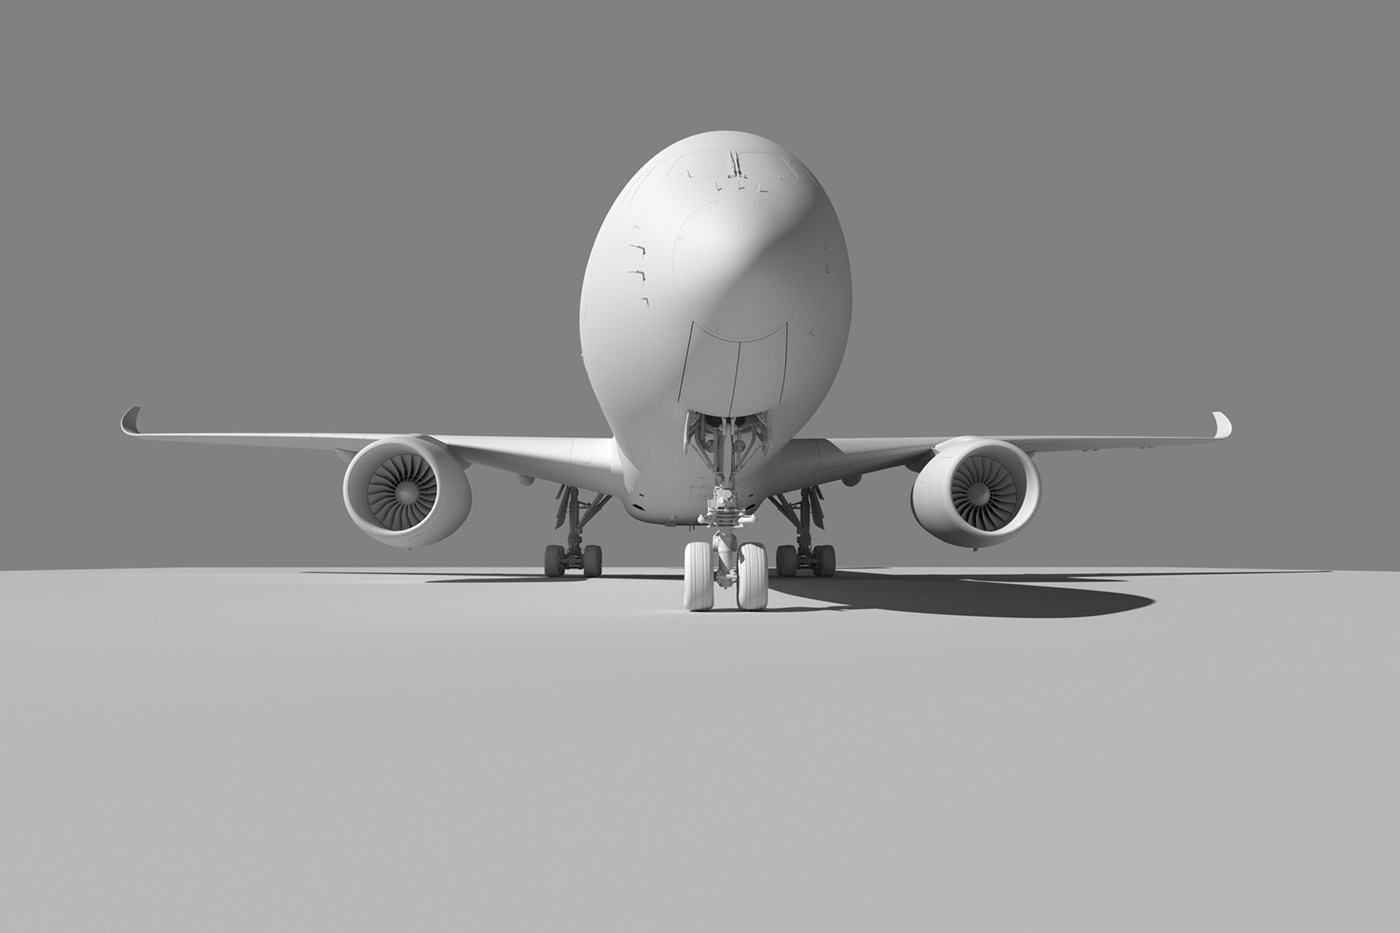 Airbus A350-900 A350 3ds max octane airplane